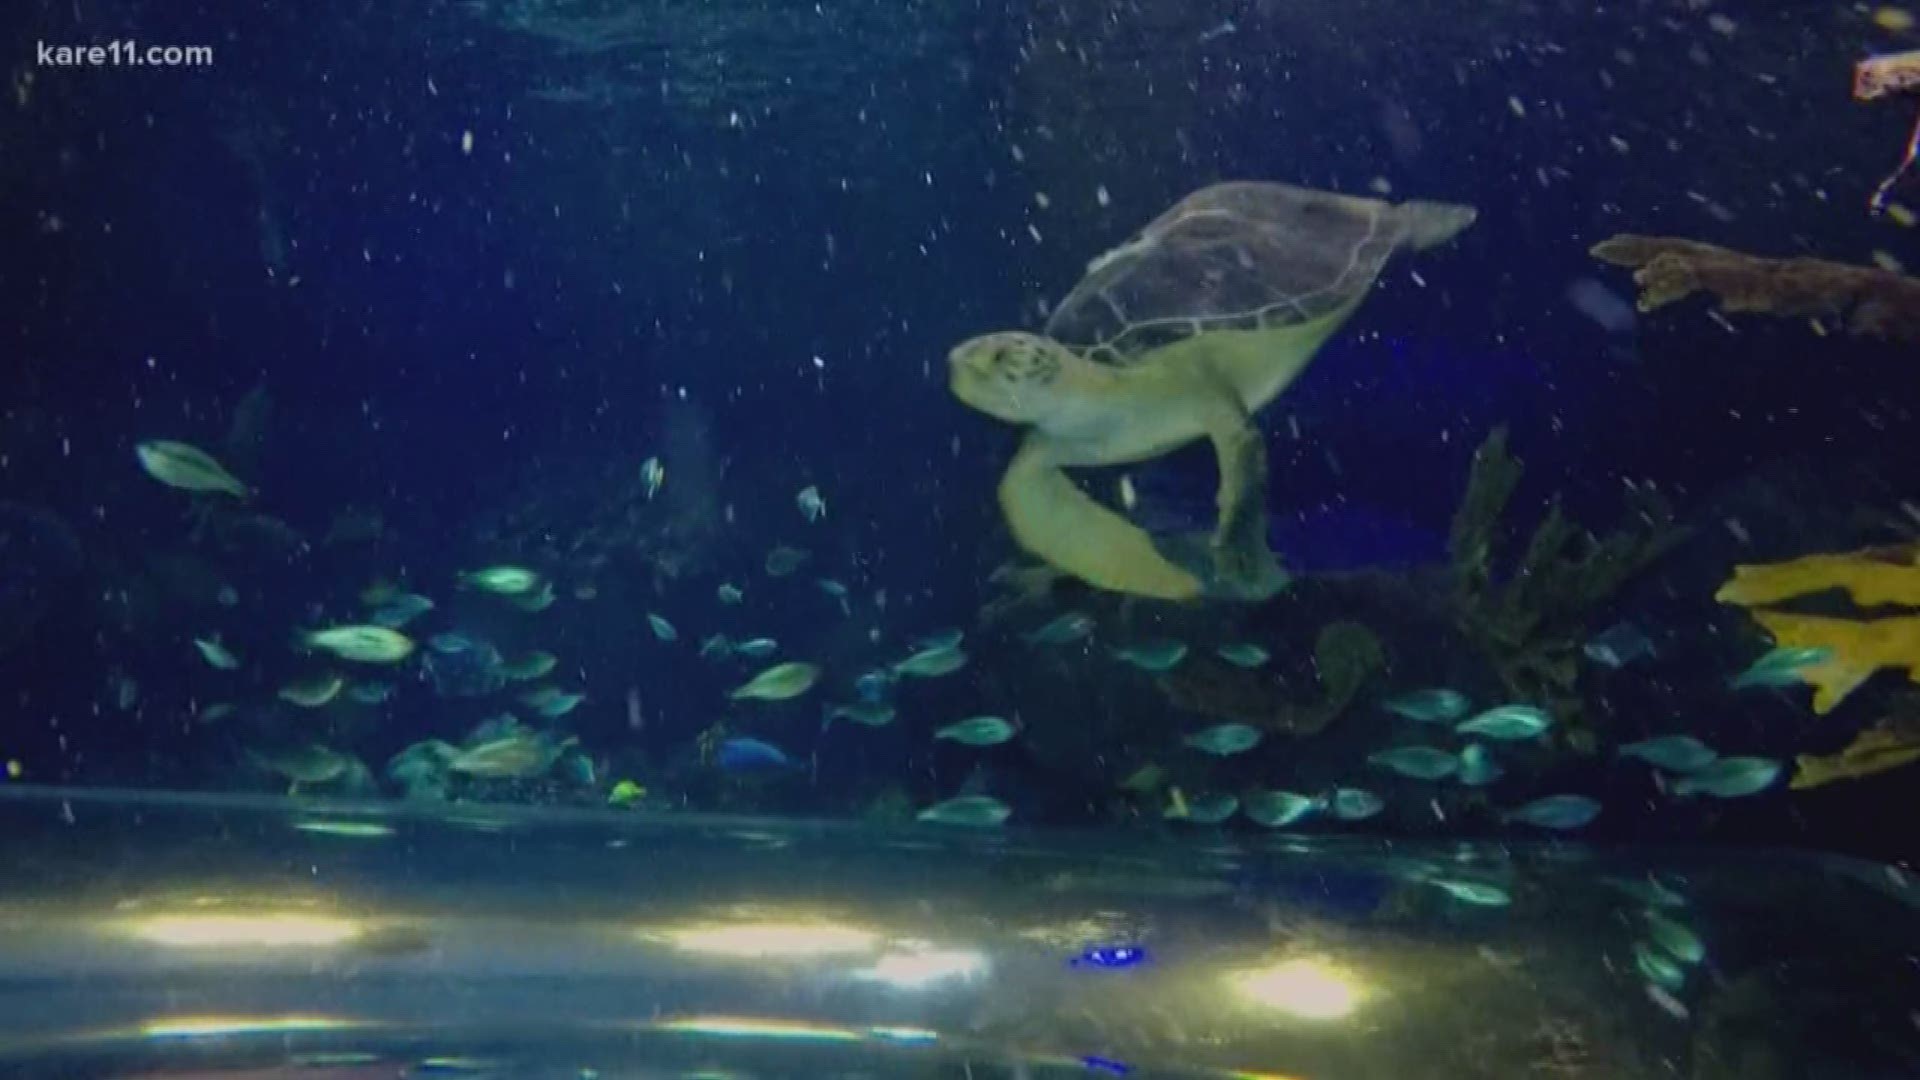 Popular Sea Life turtle at Mall of America found herself stuck at the top of the aquarium.